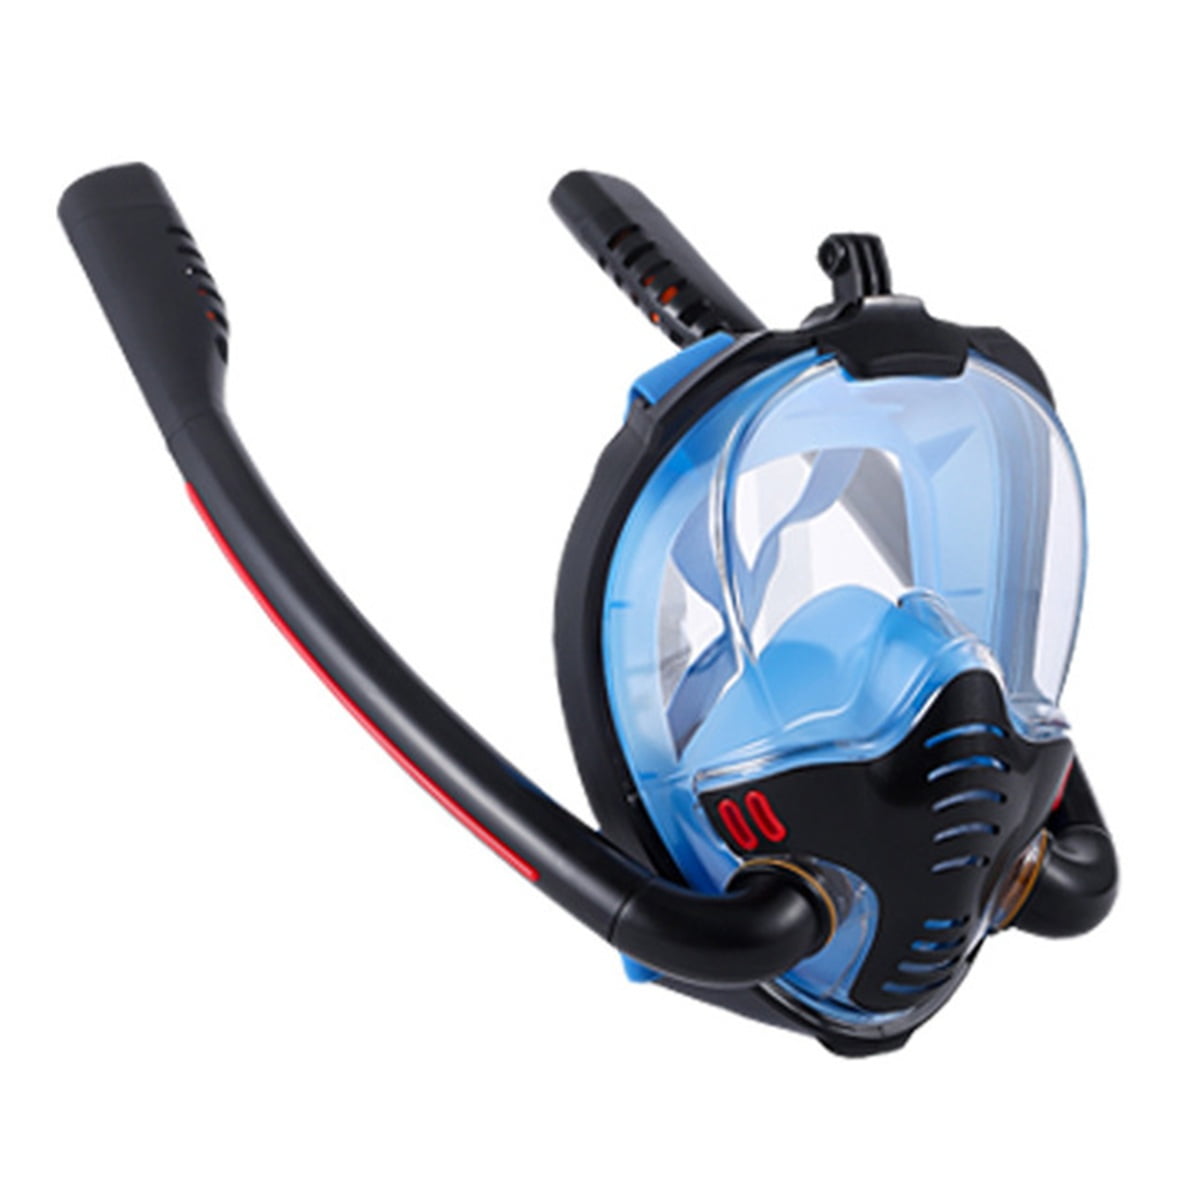 Adults 180° View Panoramic Beach Snorkel Mask Snorkeling Full Face+Camera Mount 